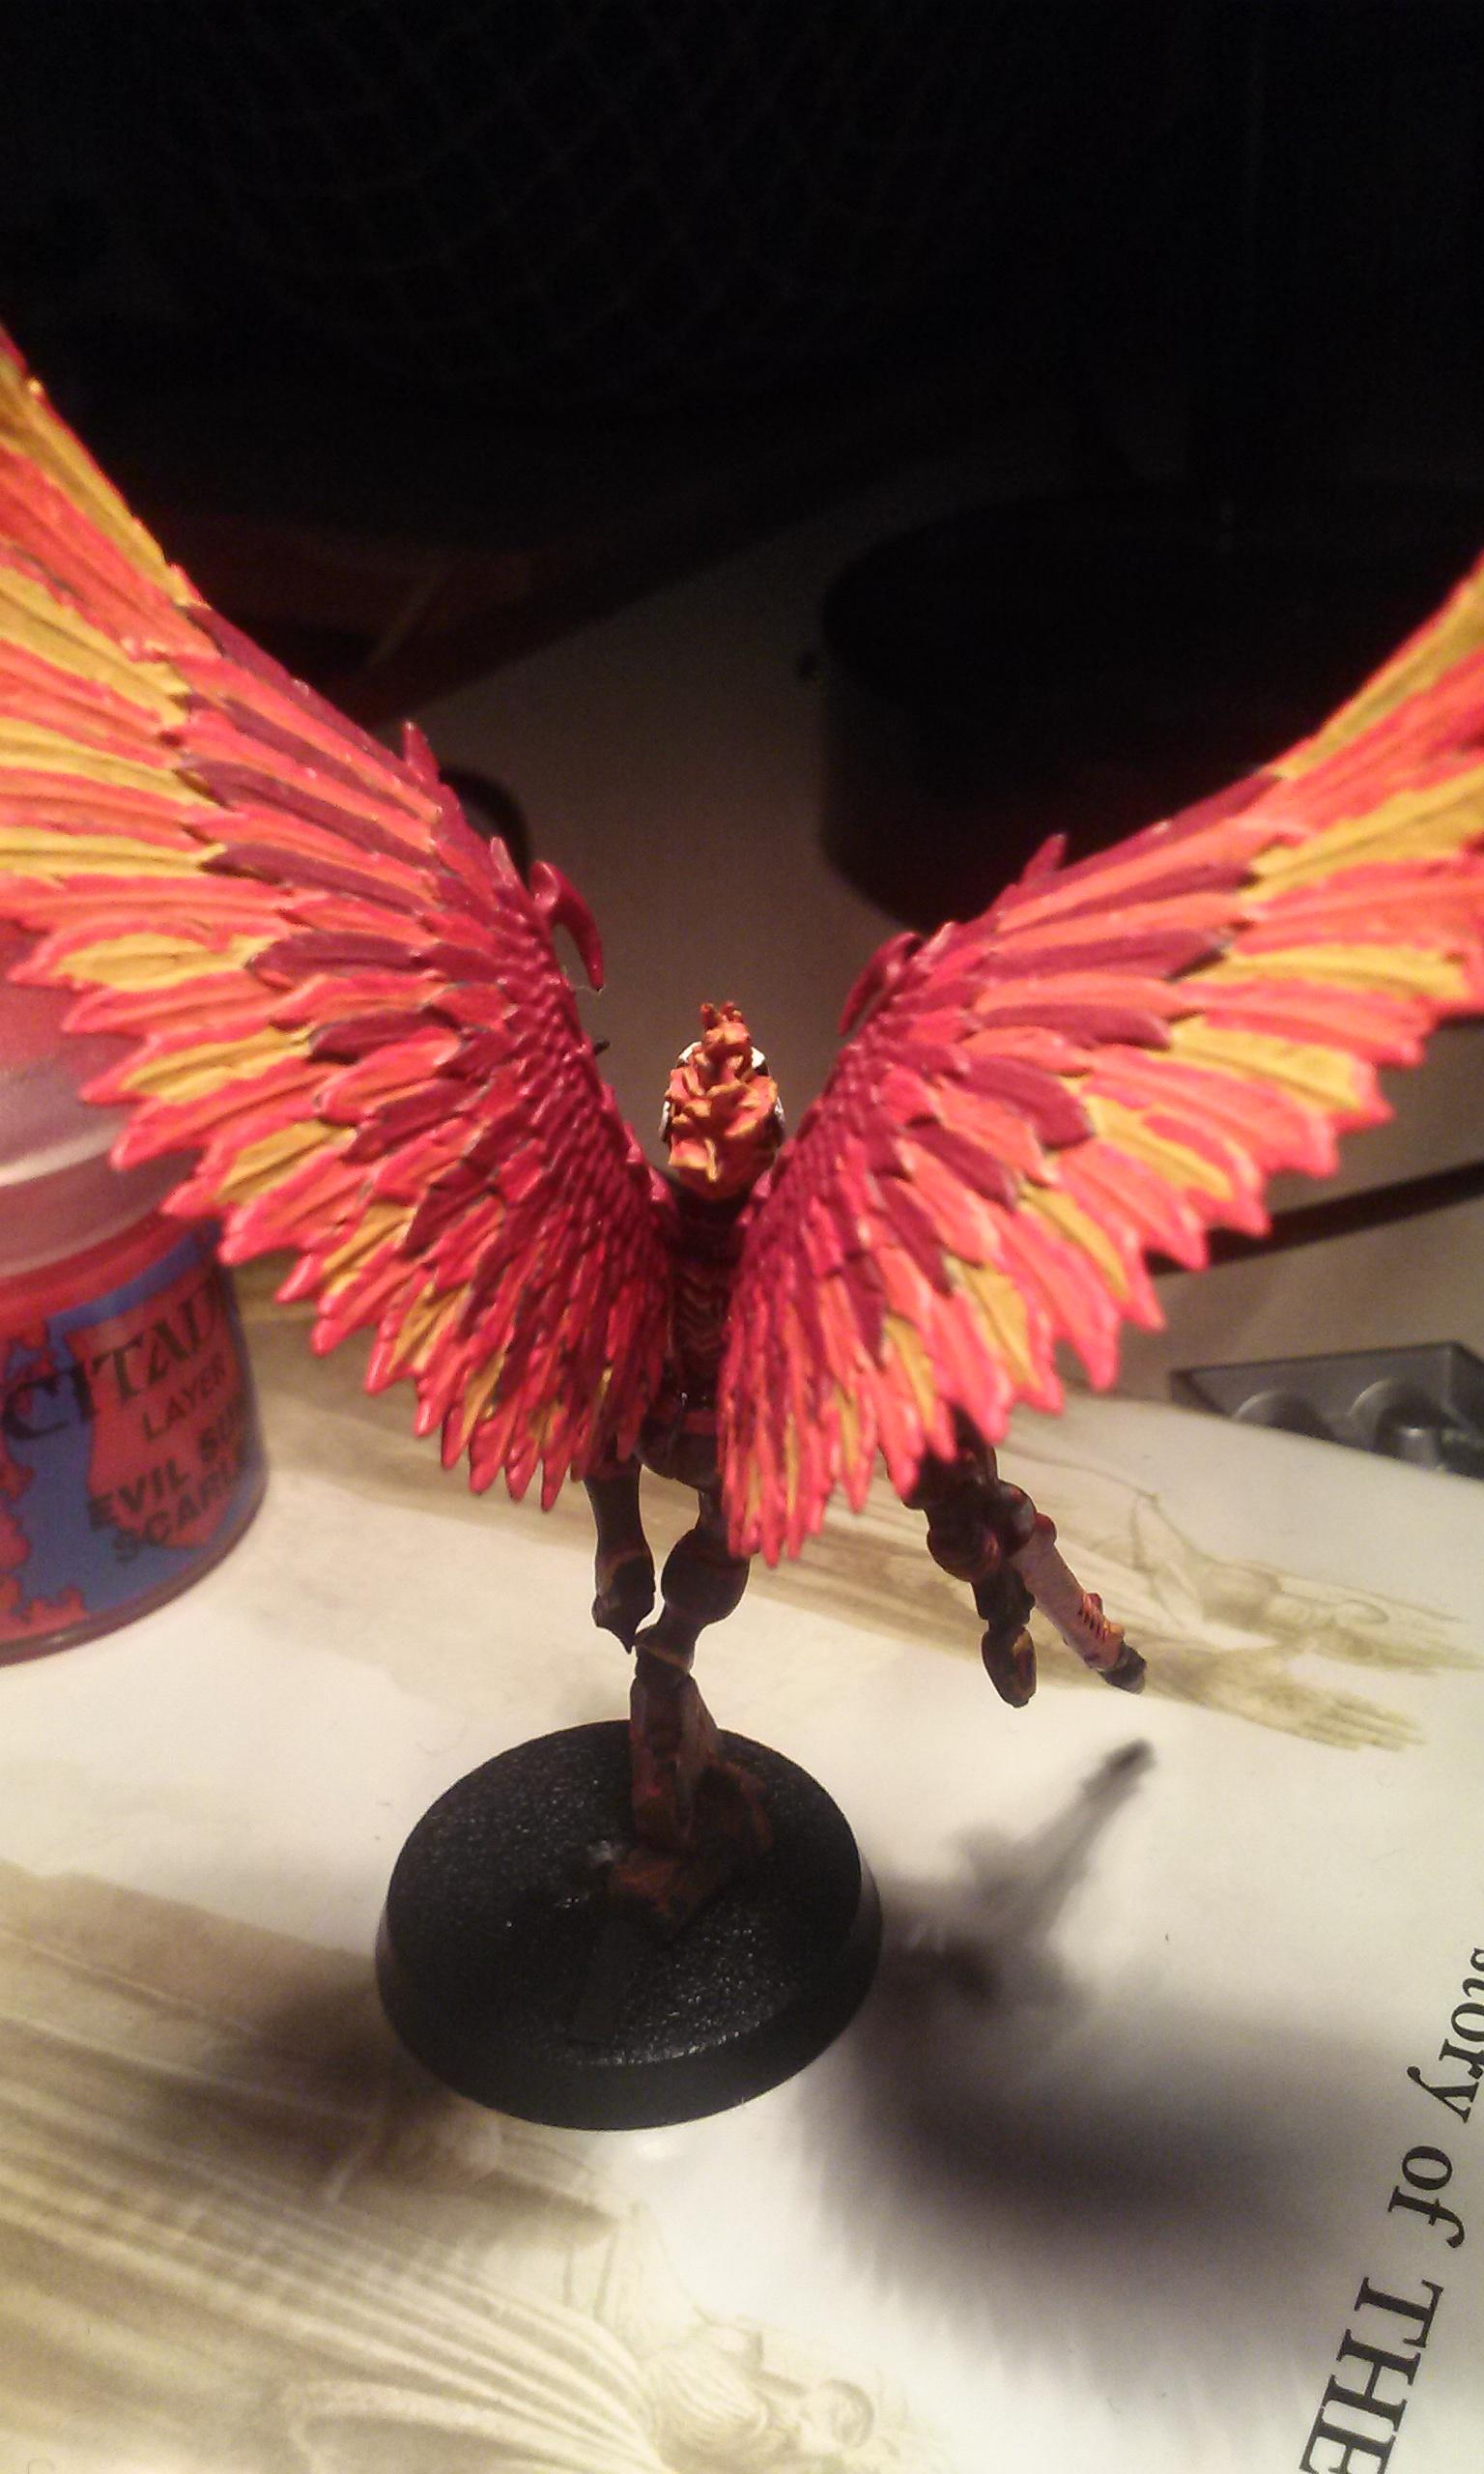 Wings of Scourge 1. Think they came out nicely